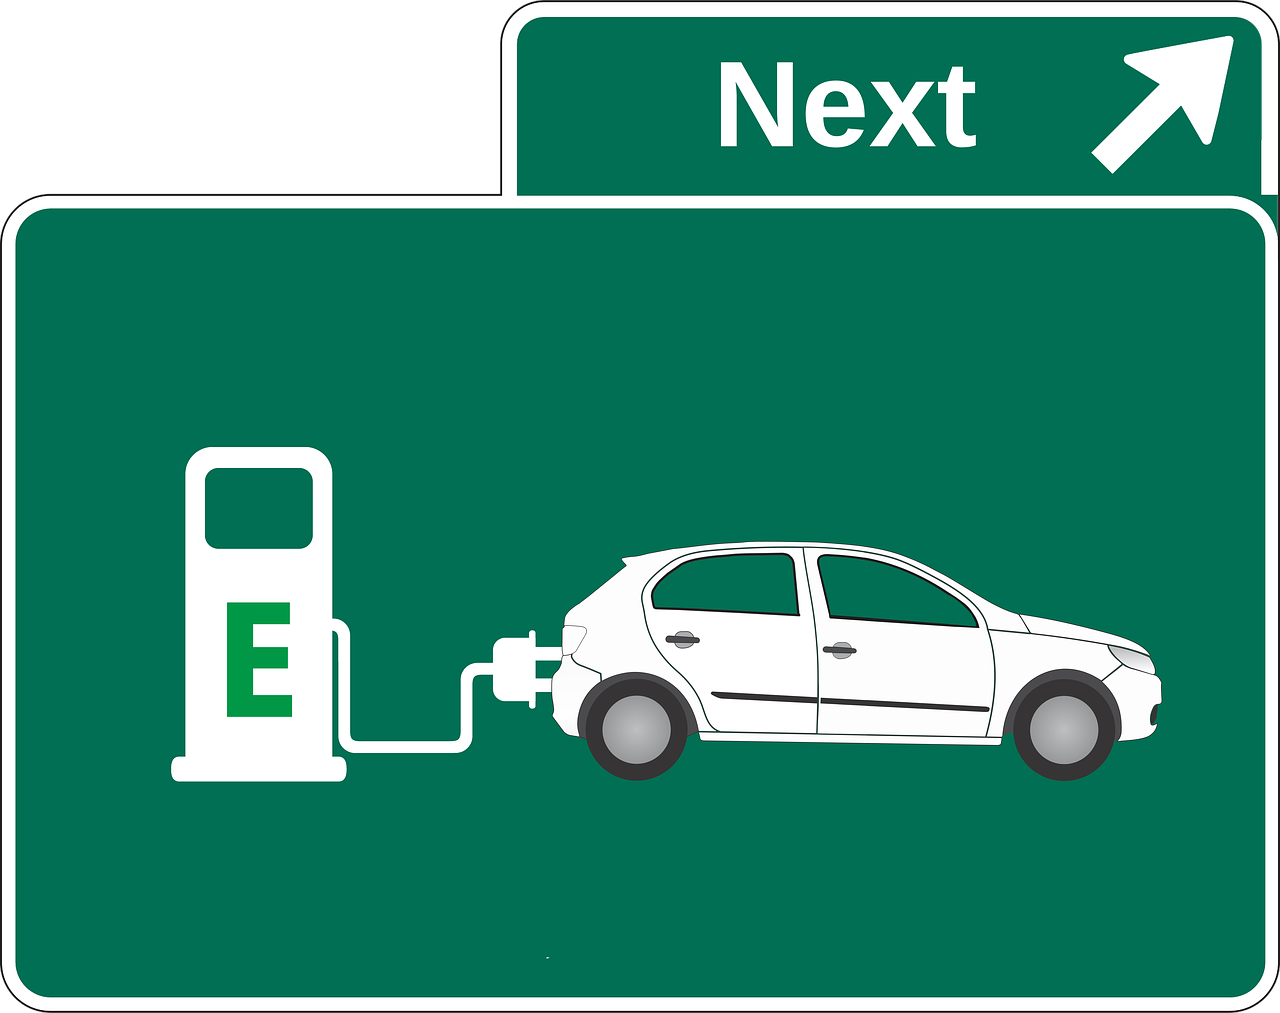 electric car petrol stations environment free photo